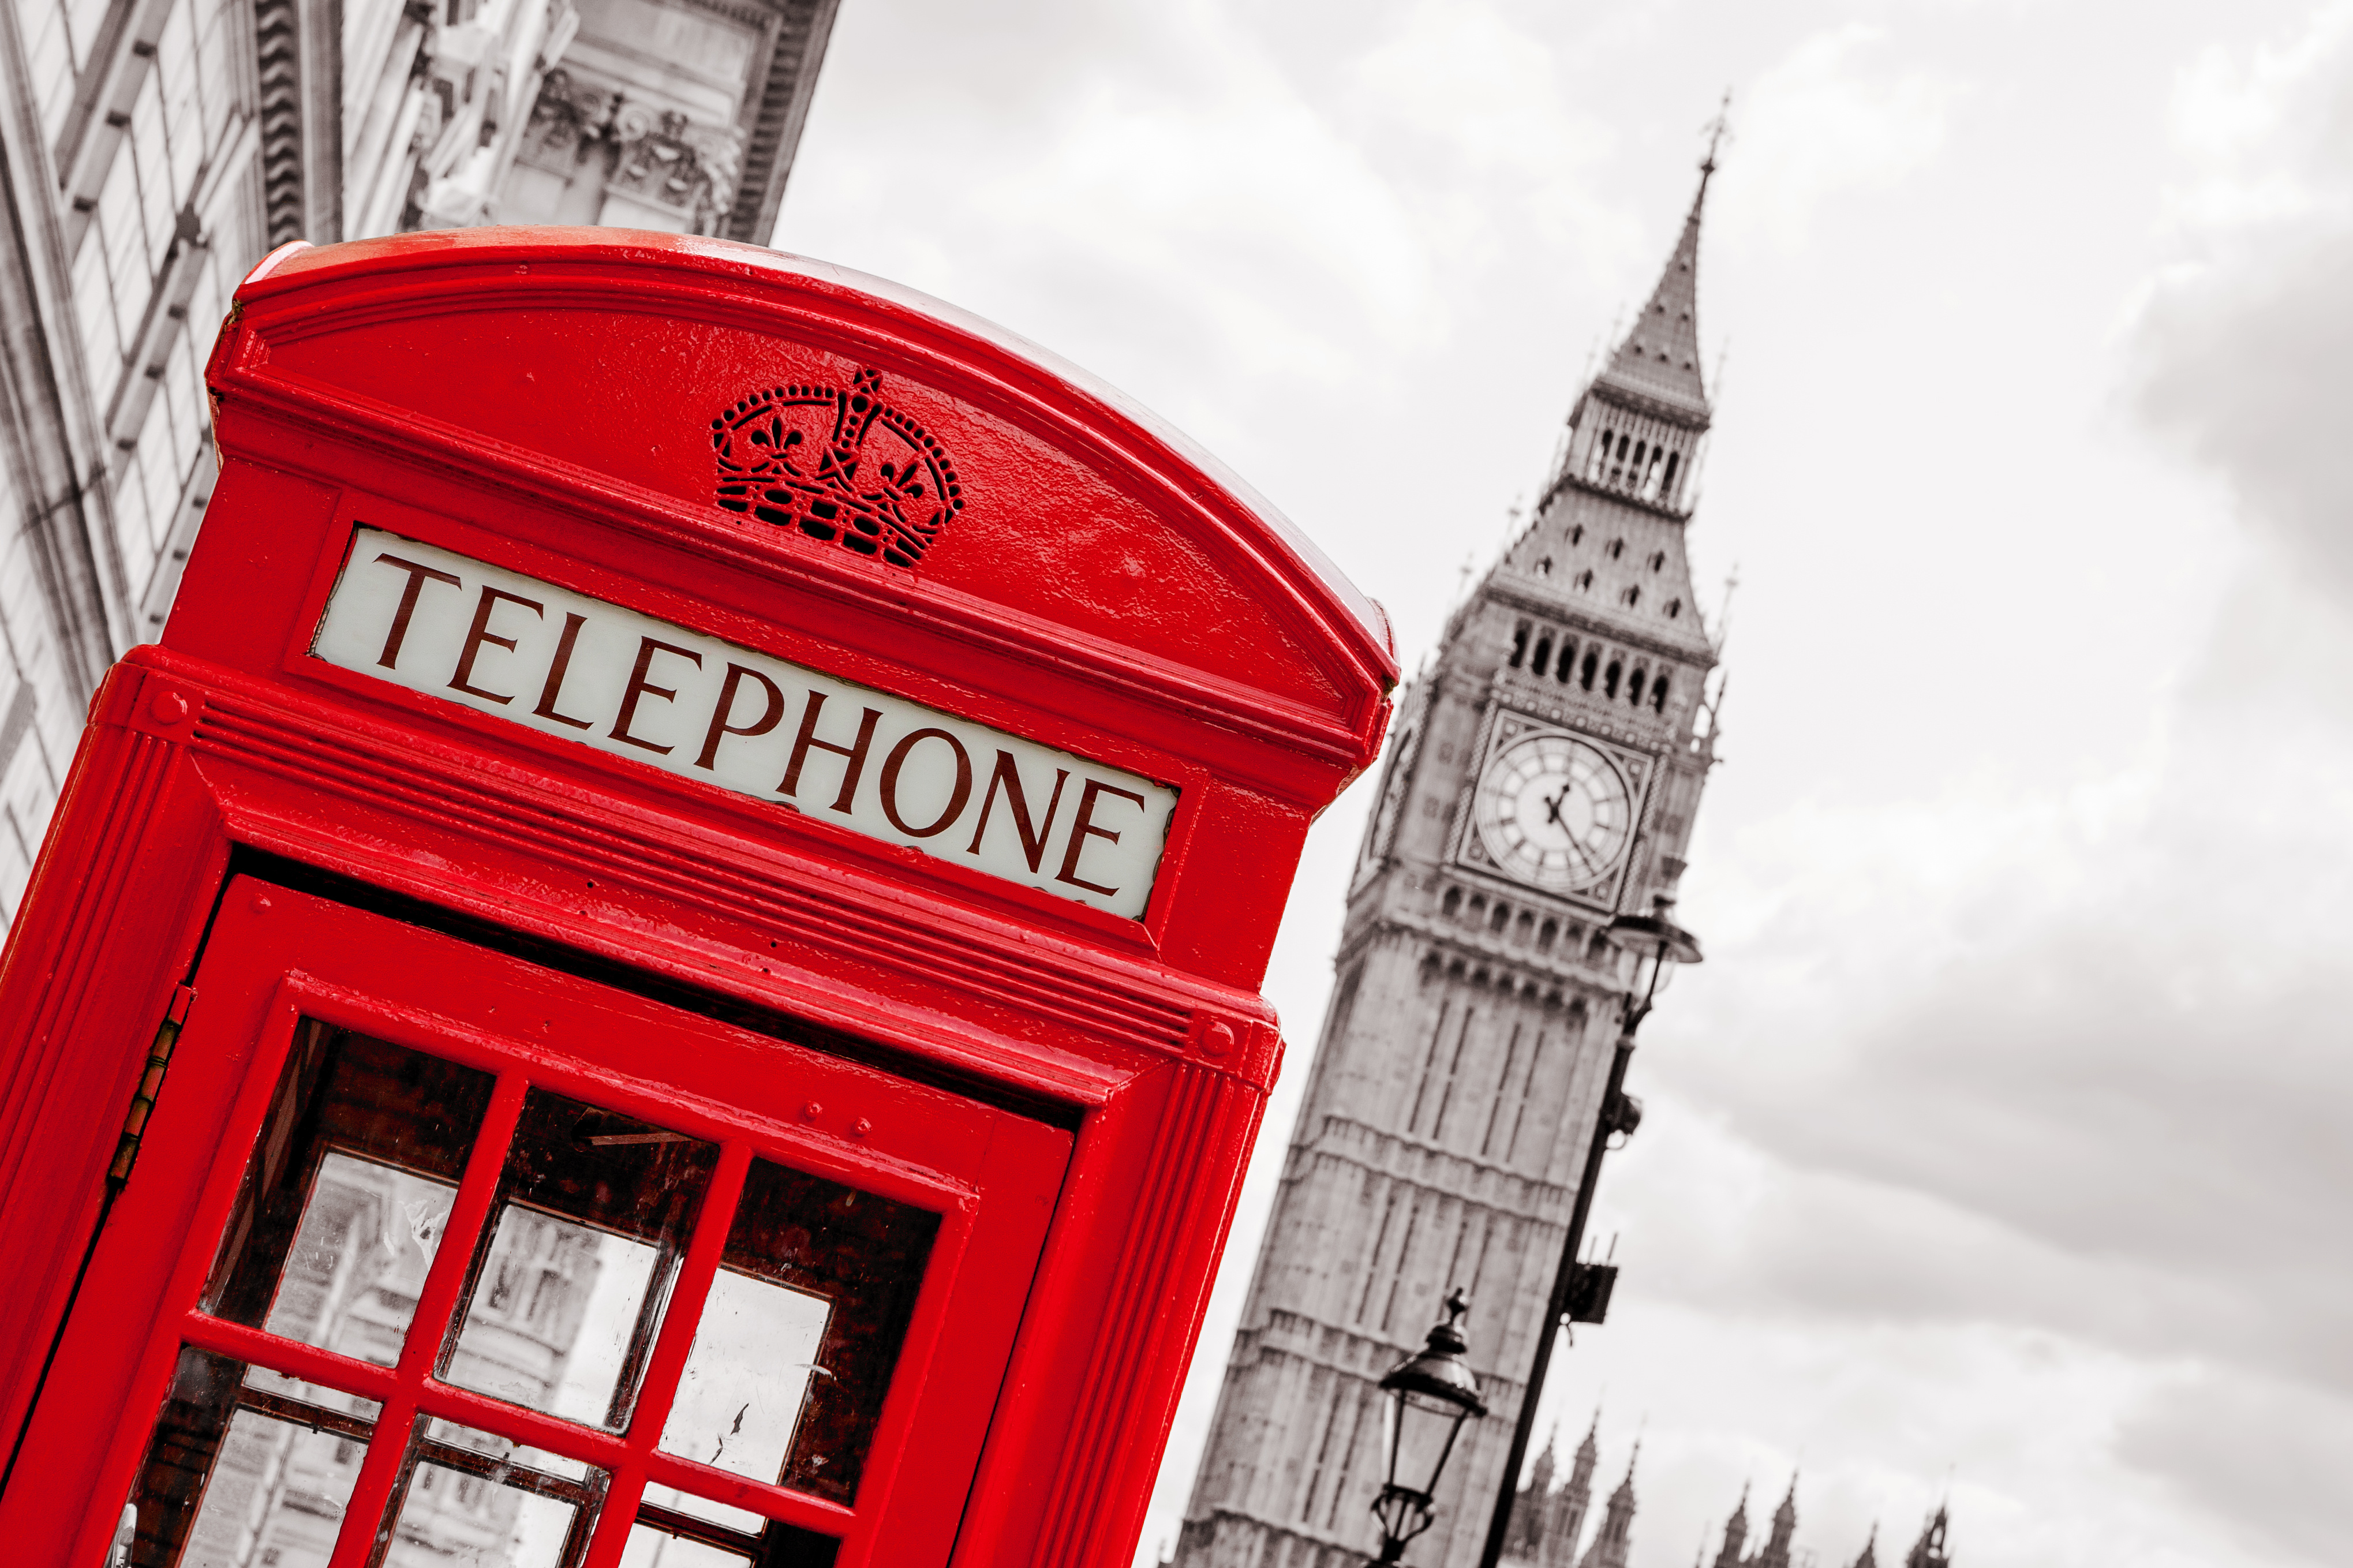 London England Britain UK Red Red Telephone Box Selective Coloring Telephone Big Ben Phone Box Westm 4077x2717